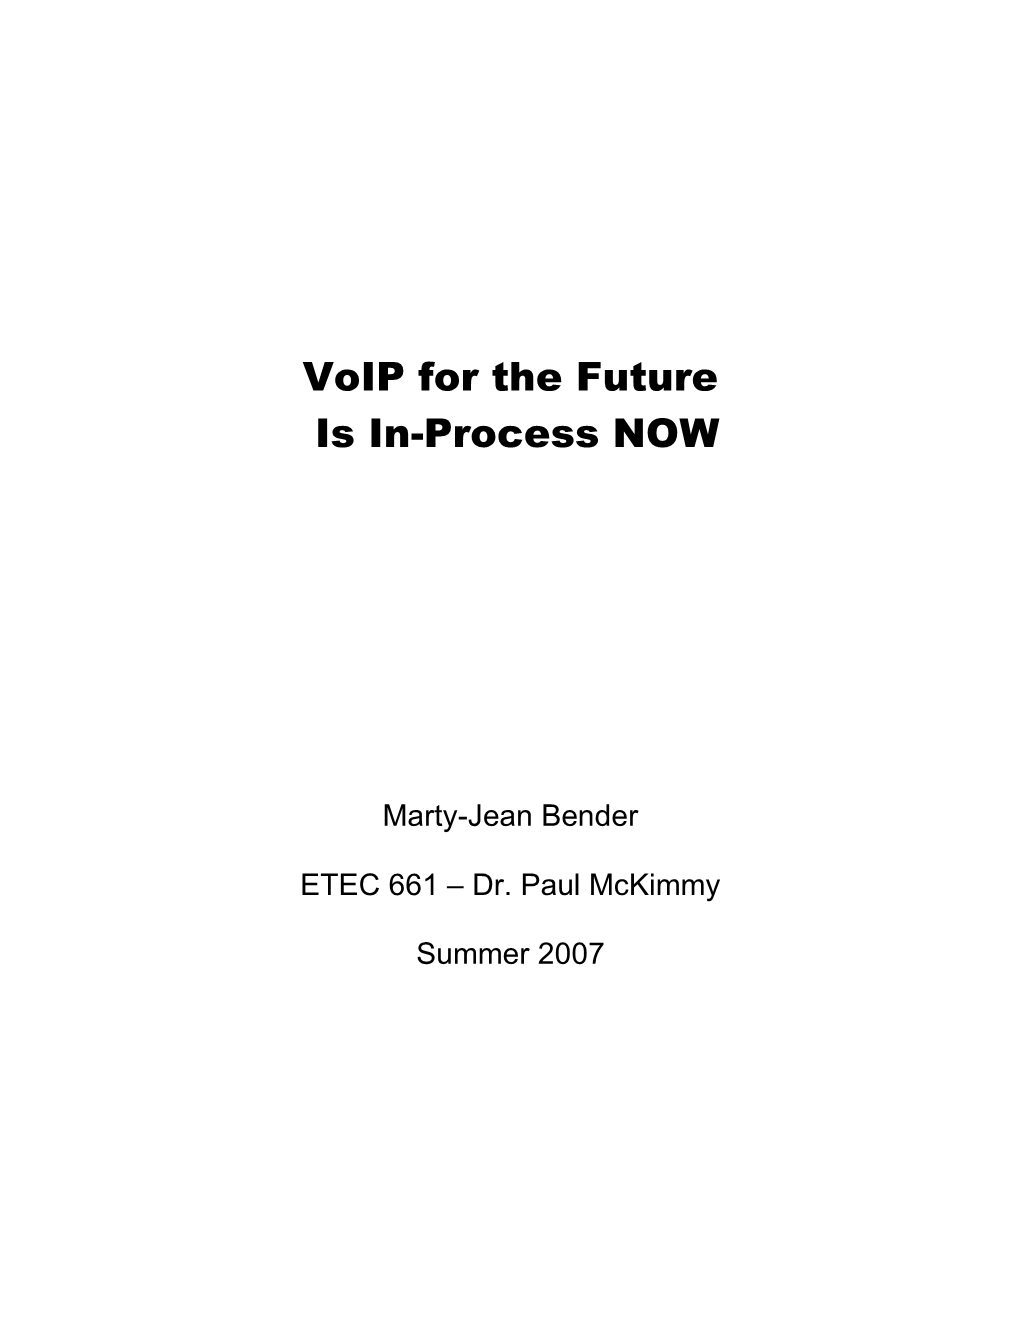 VOIP Efficacy Research